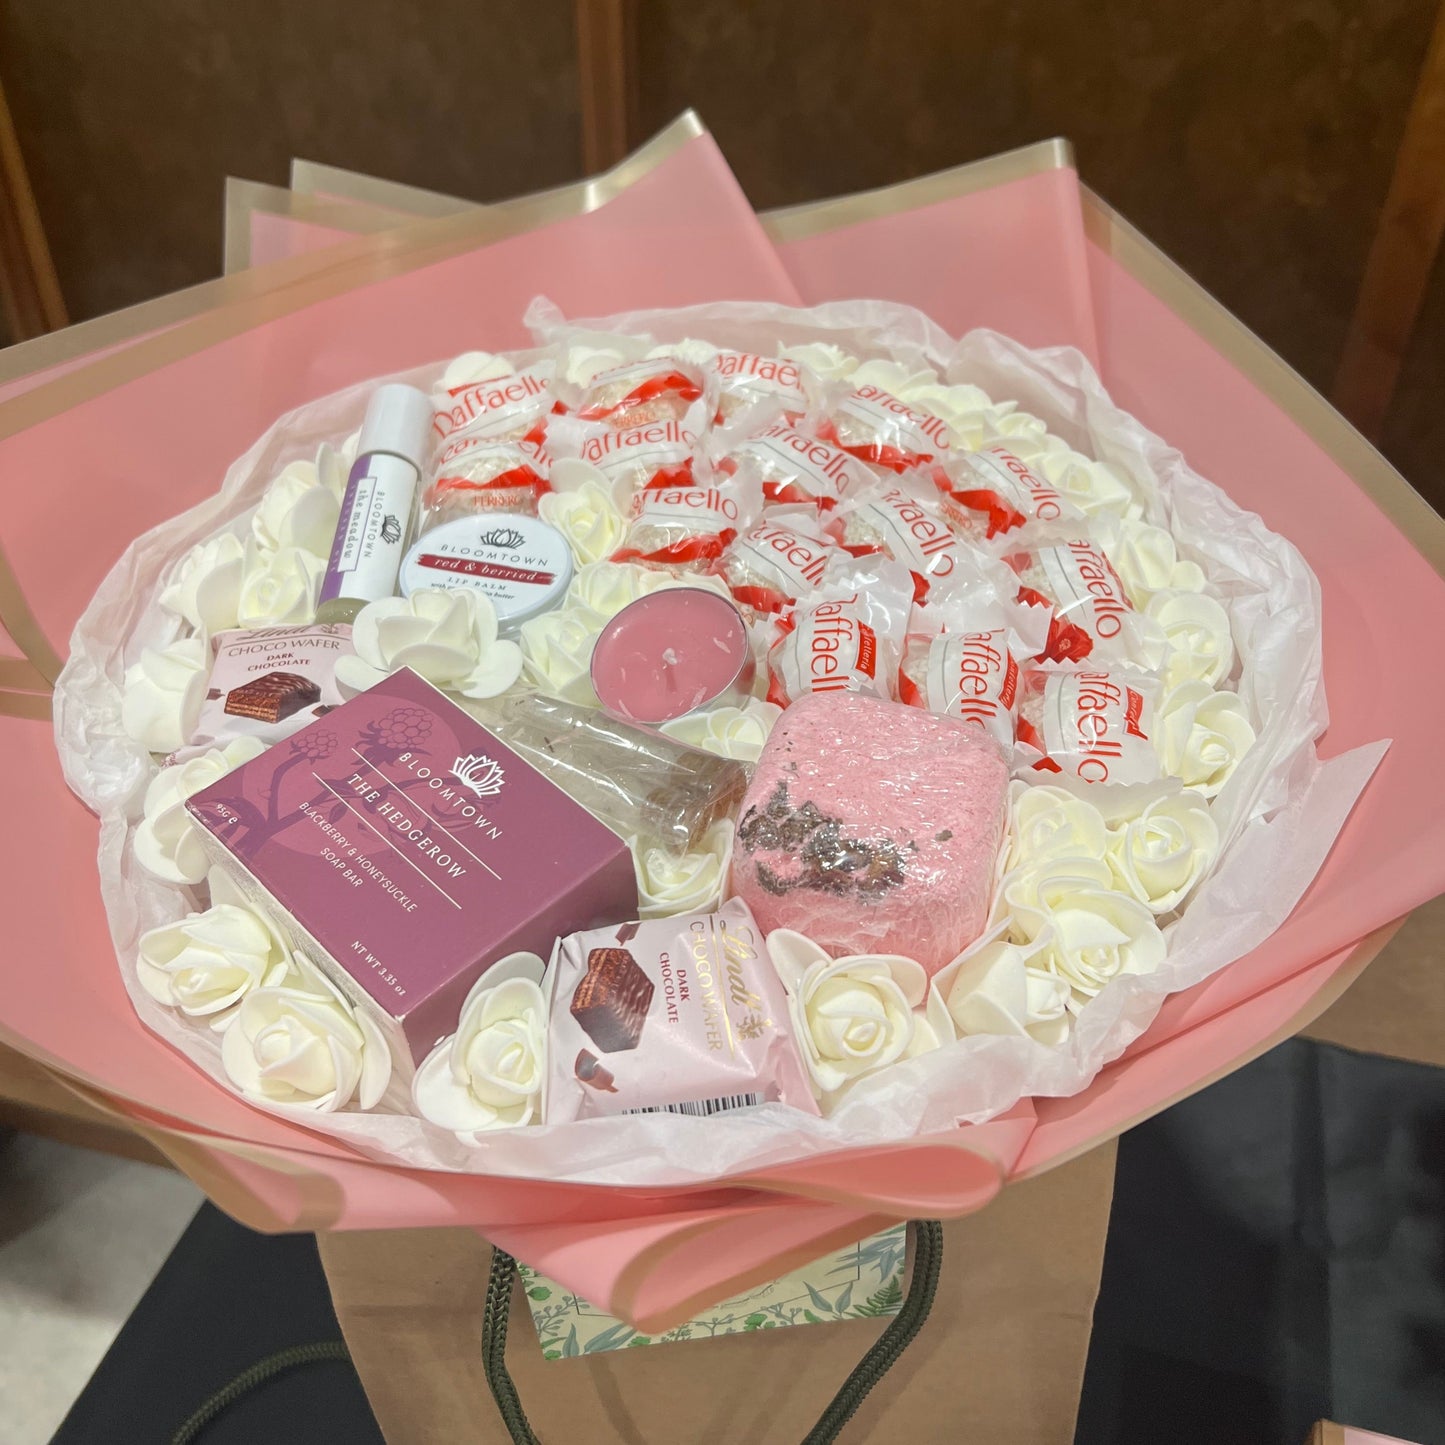 'Serene Delights' is a gift bouquet of white, lasting roses, delicious chocolates, and luxury spa treats including a shower steamer, bath salts, lip balm and more.